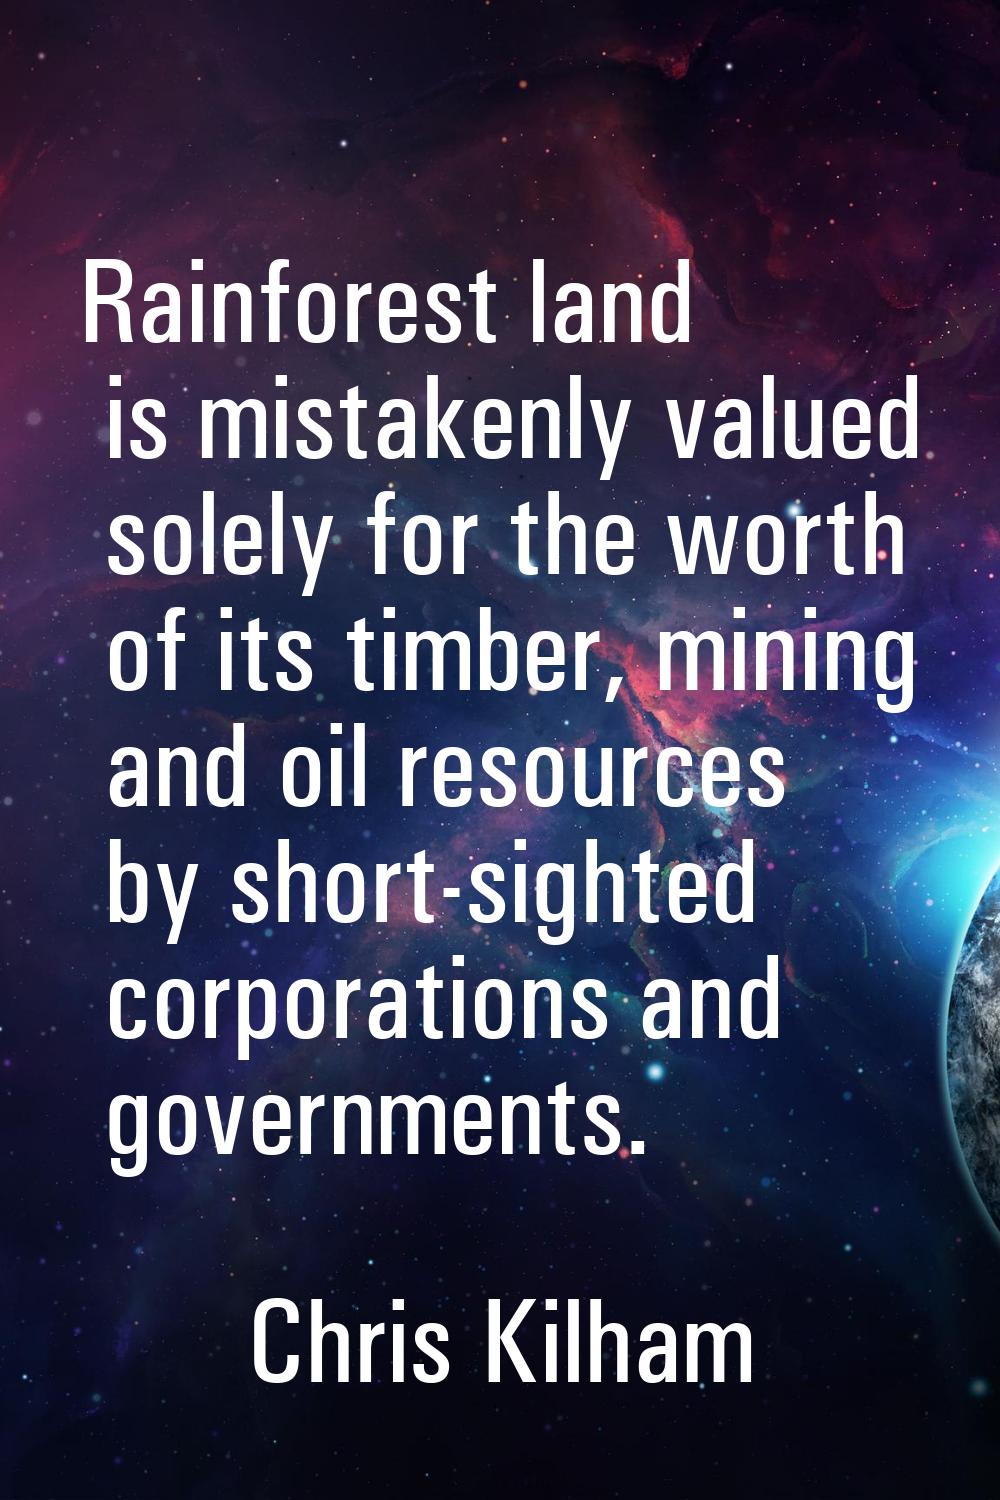 Rainforest land is mistakenly valued solely for the worth of its timber, mining and oil resources b